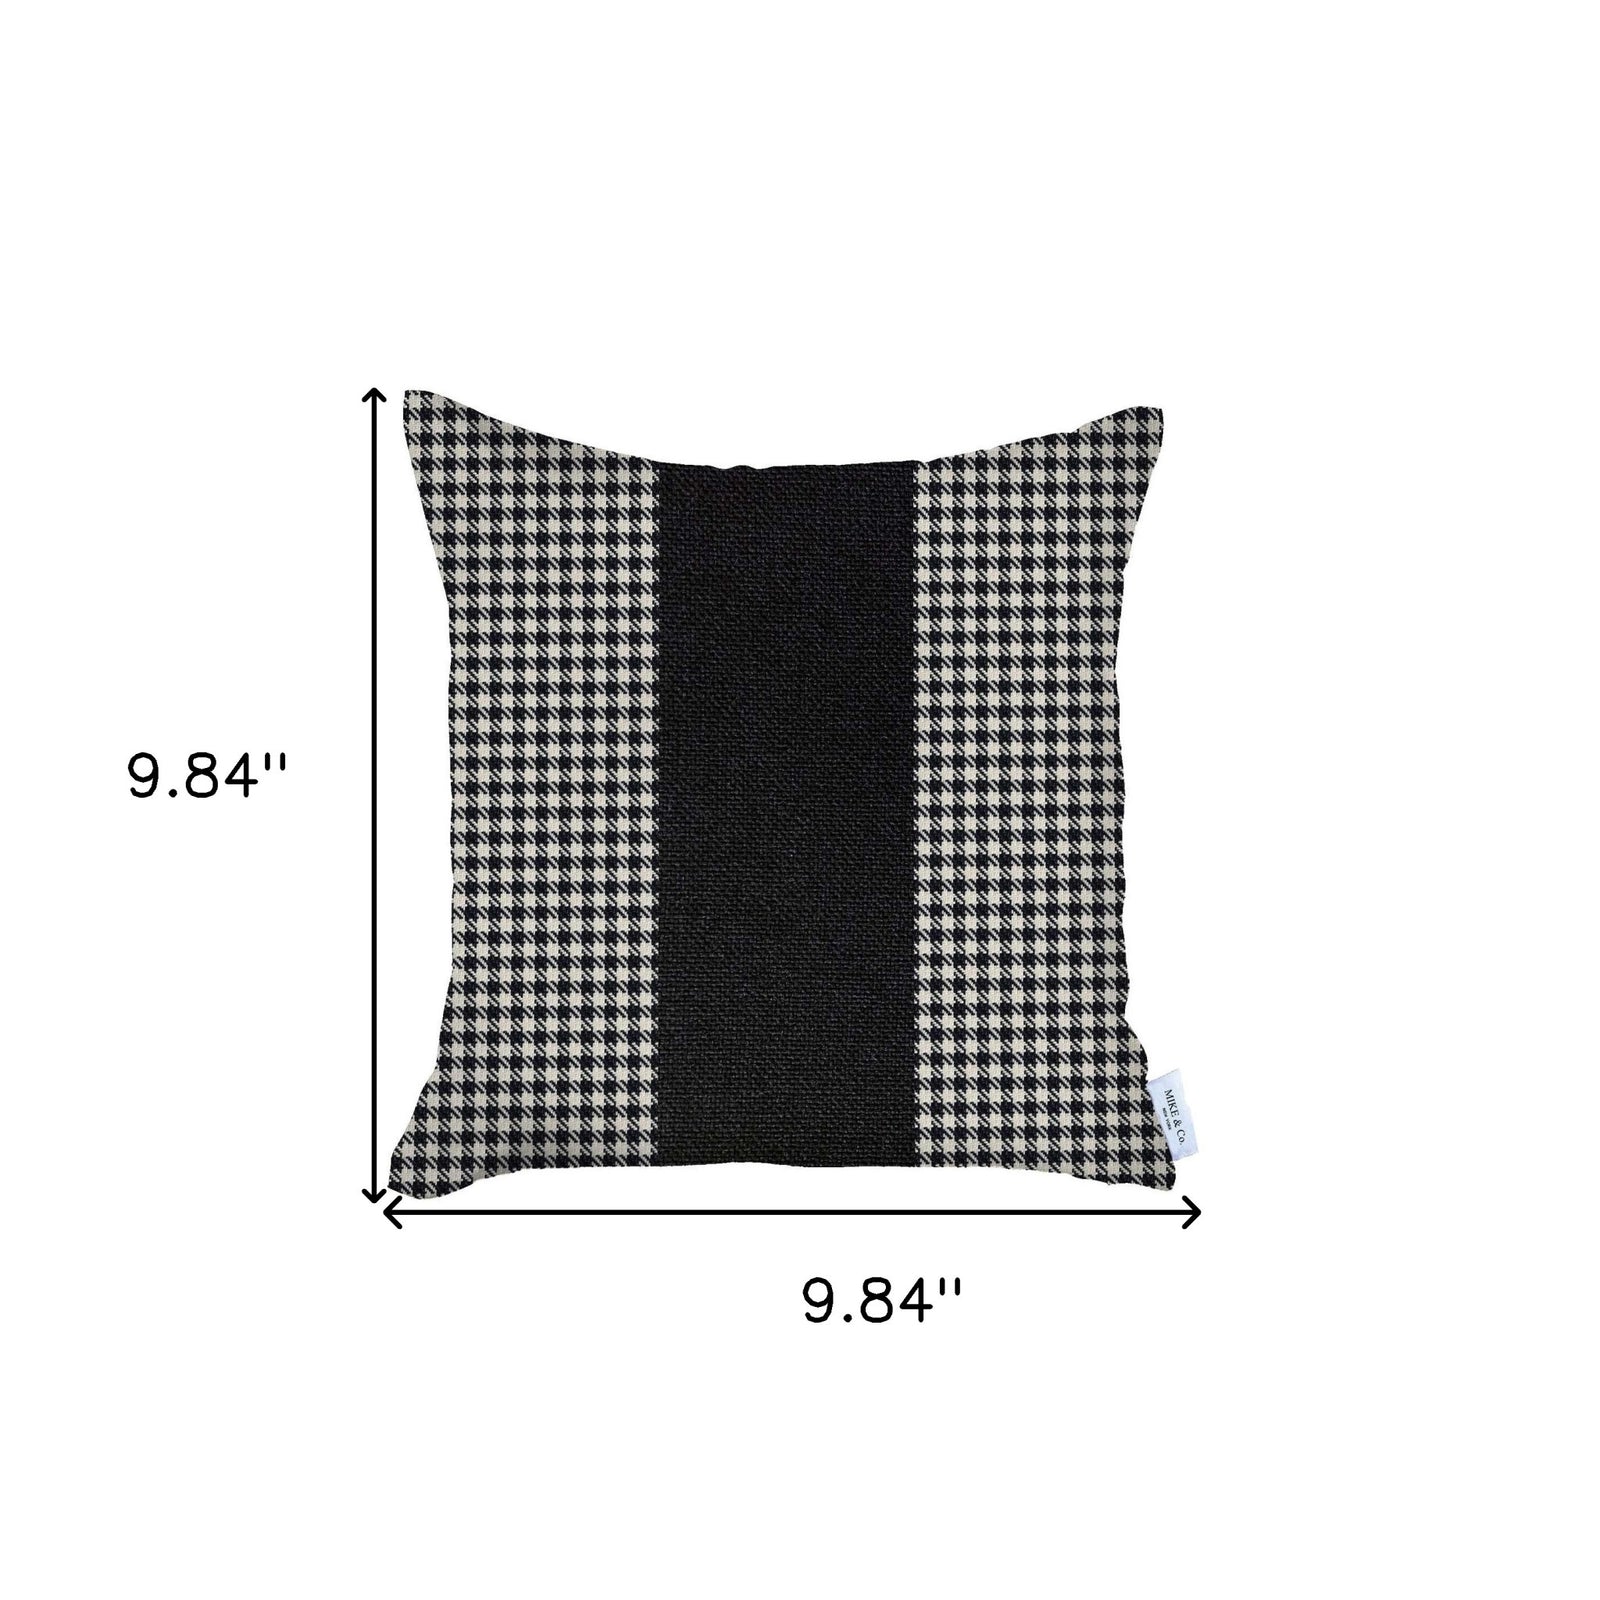 18" X 18" White And Black Houndstooth Zippered Handmade Polyester Throw Pillow Cover